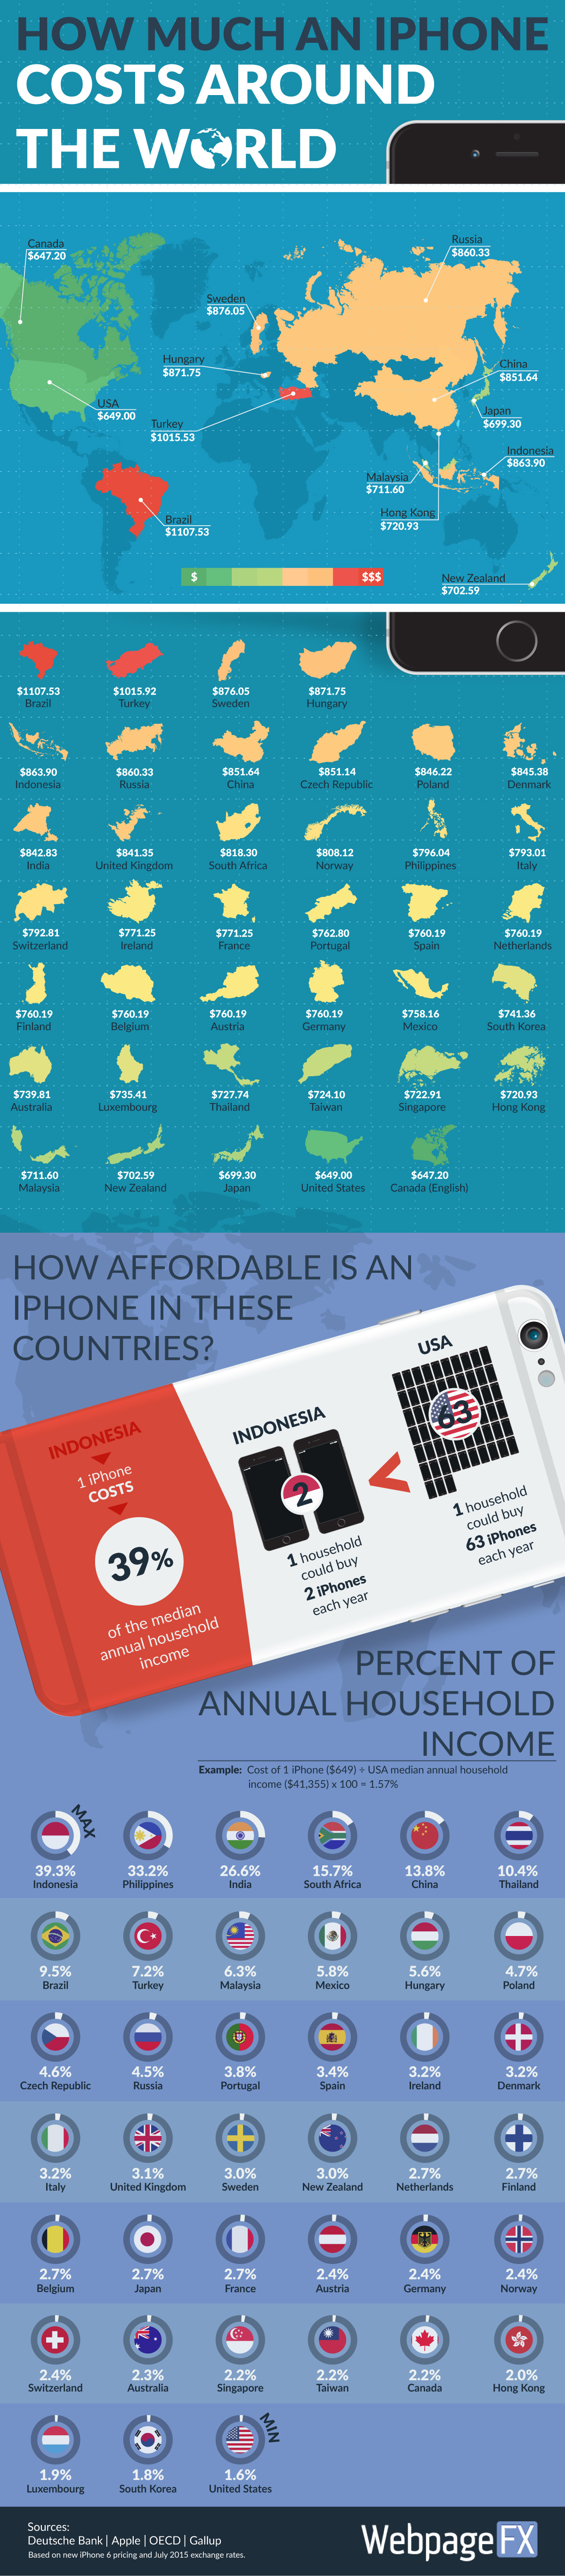 Global iPhone 6 Costs vs. Median Annual Household Income [Infographic]